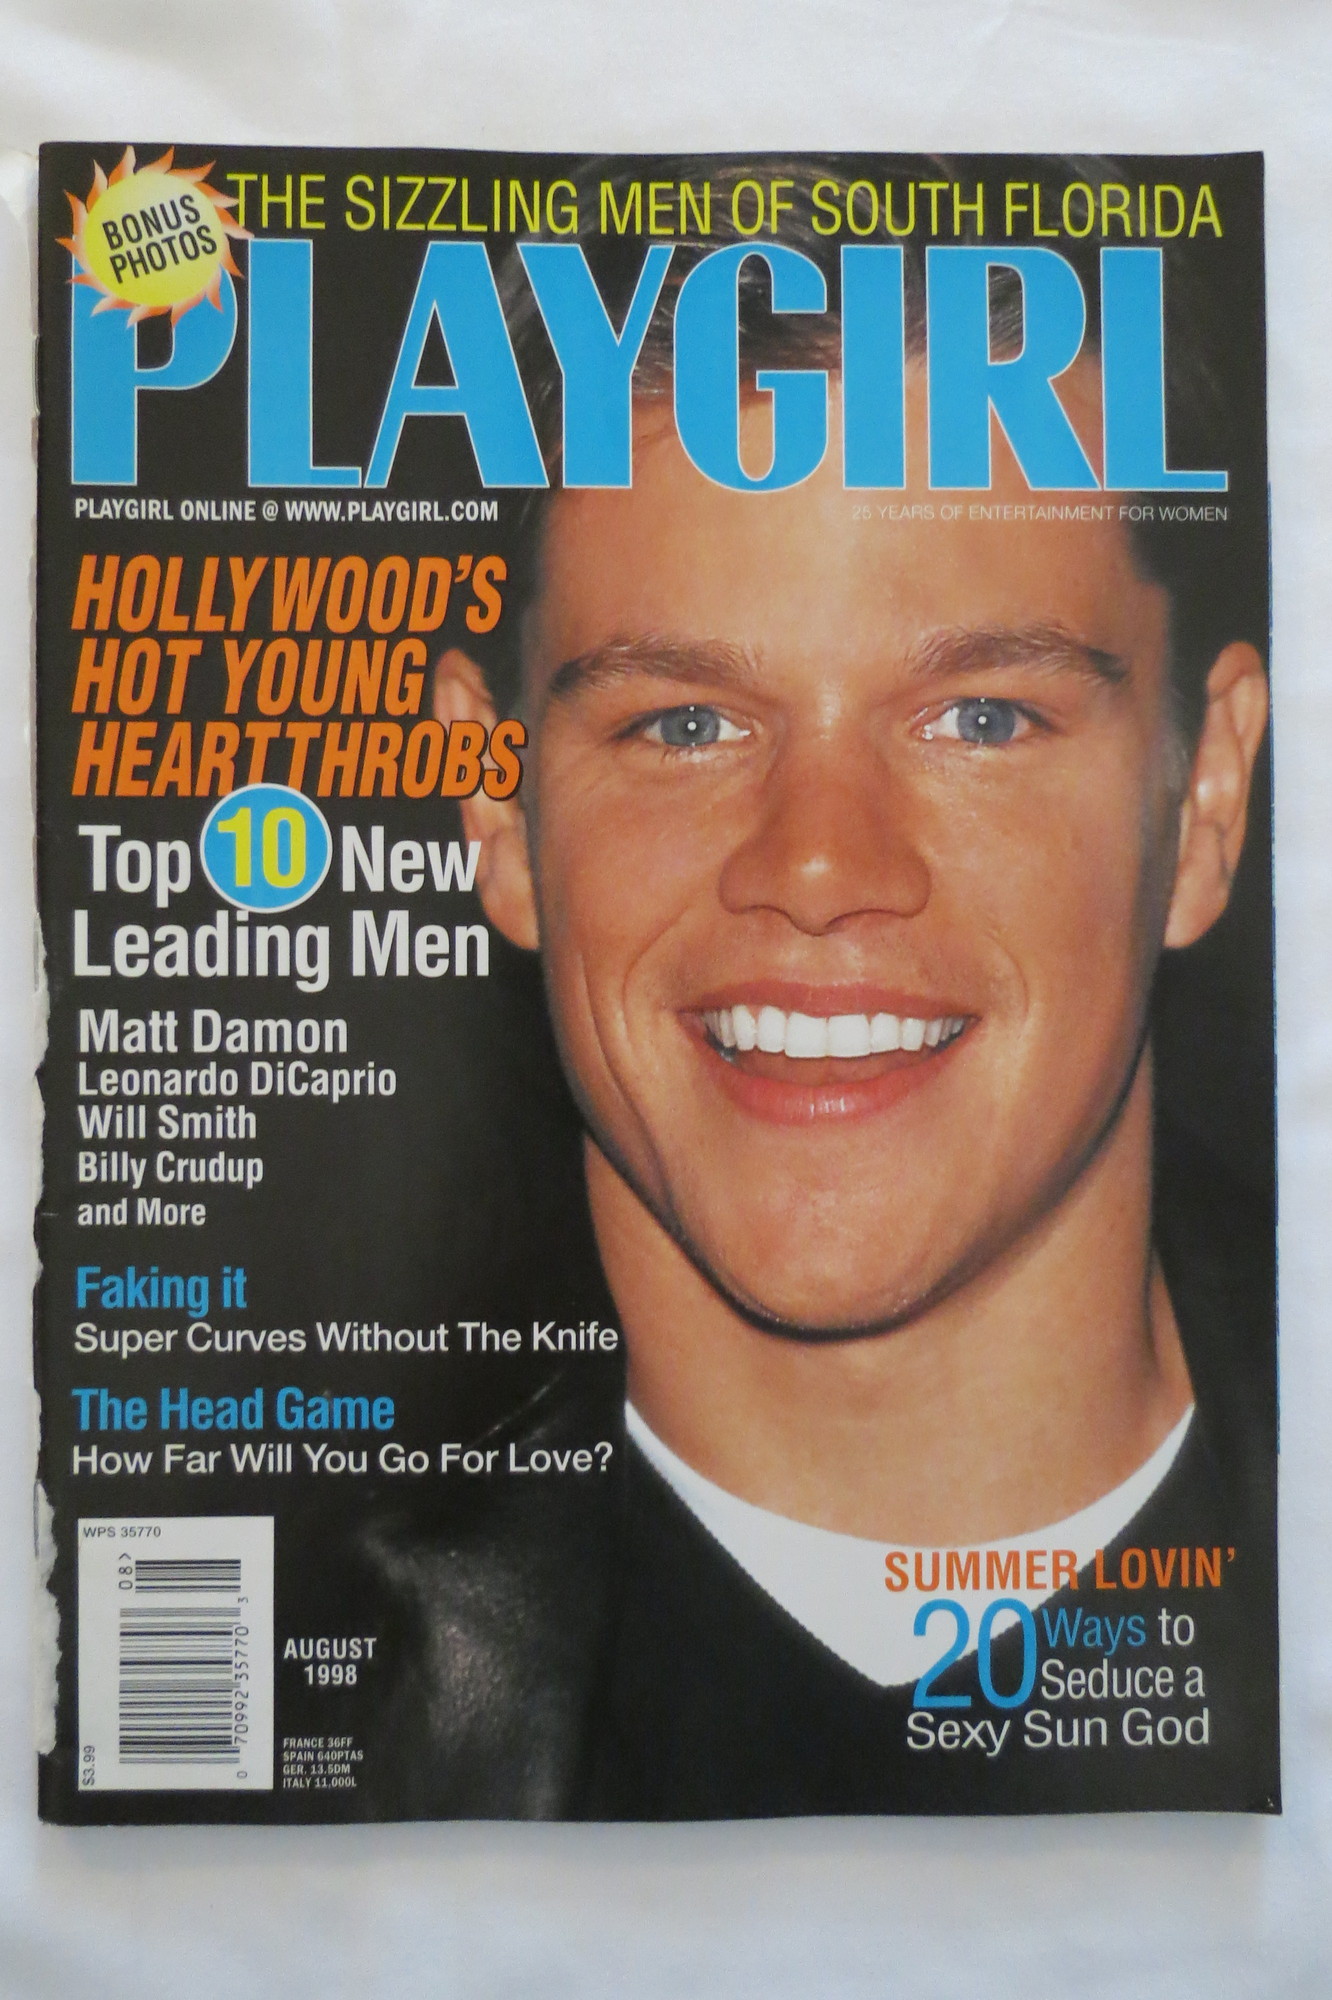 PLAYGIRL MAGAZINE AUGUST 1998 BEAUTIFUL MATT DAMON ON THE COVER HOW FAR WILL YOU GO FOR LOVE 